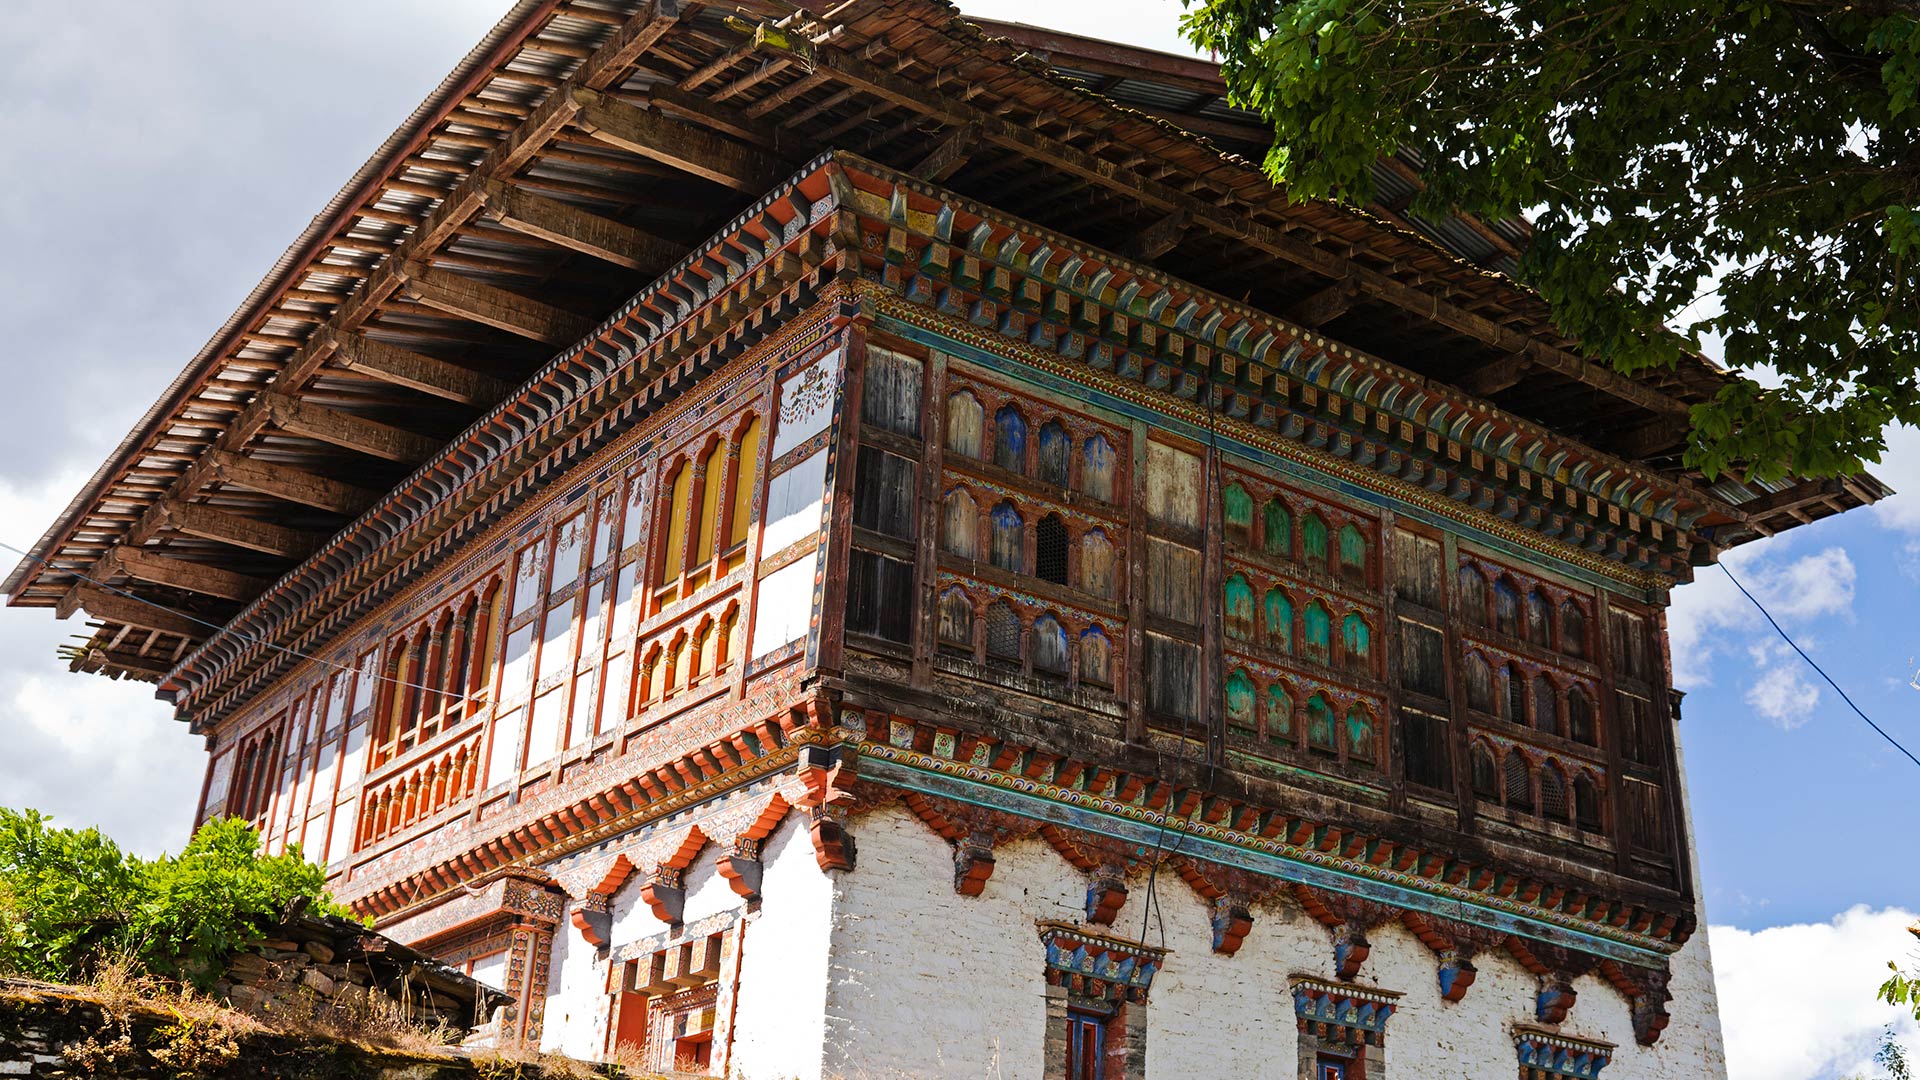 The 16th century Ugyencholing Palace, an ancient manor house turned local museum in central Bhutan